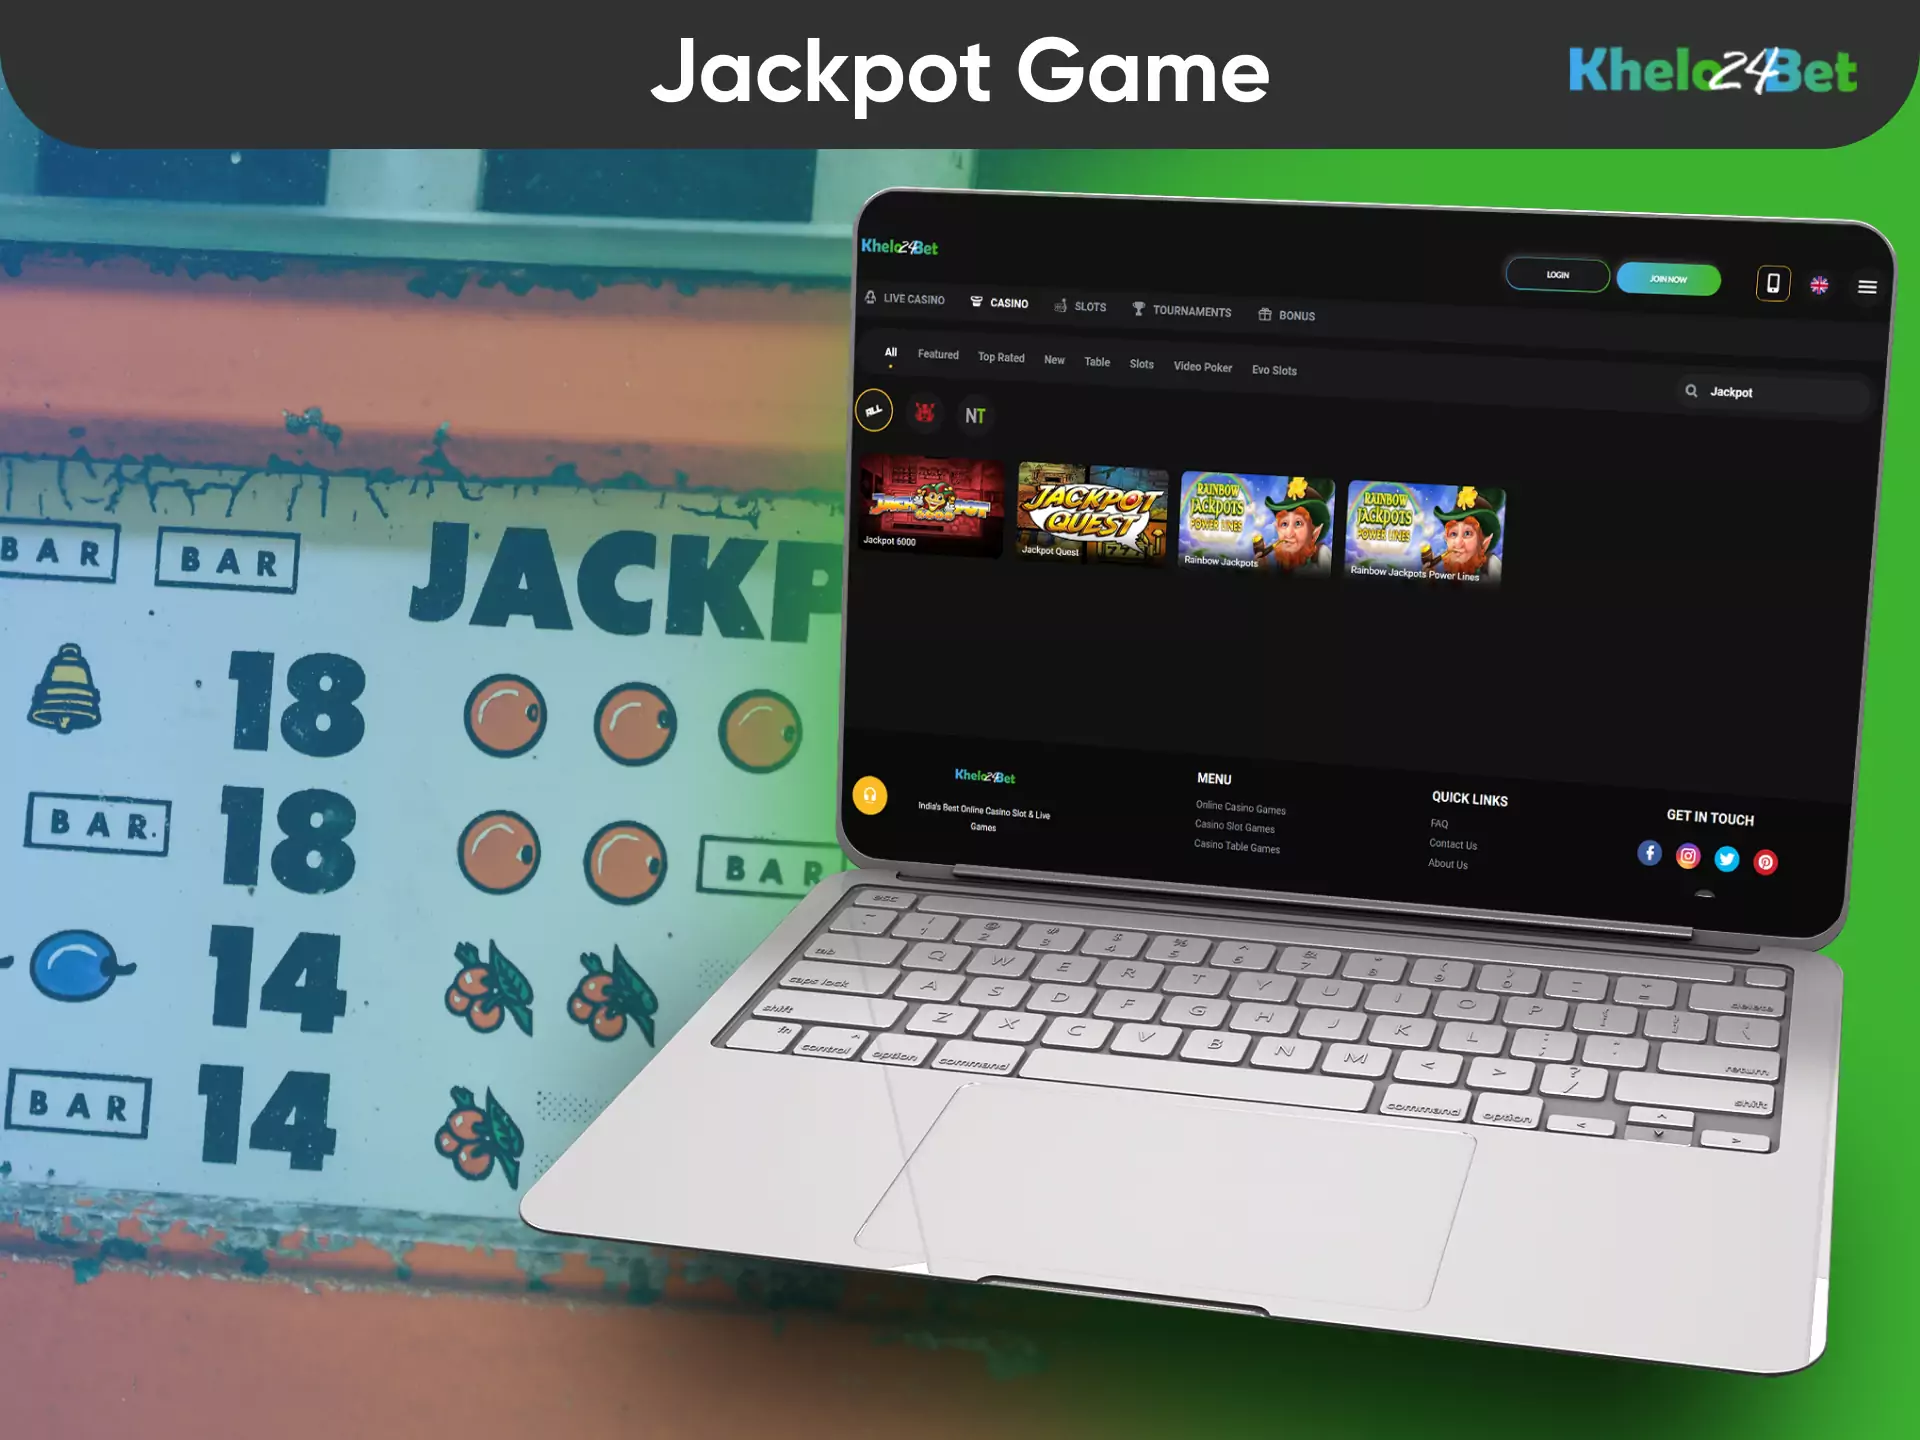 In the Khelo24bet Casino, you can play jackpot games.